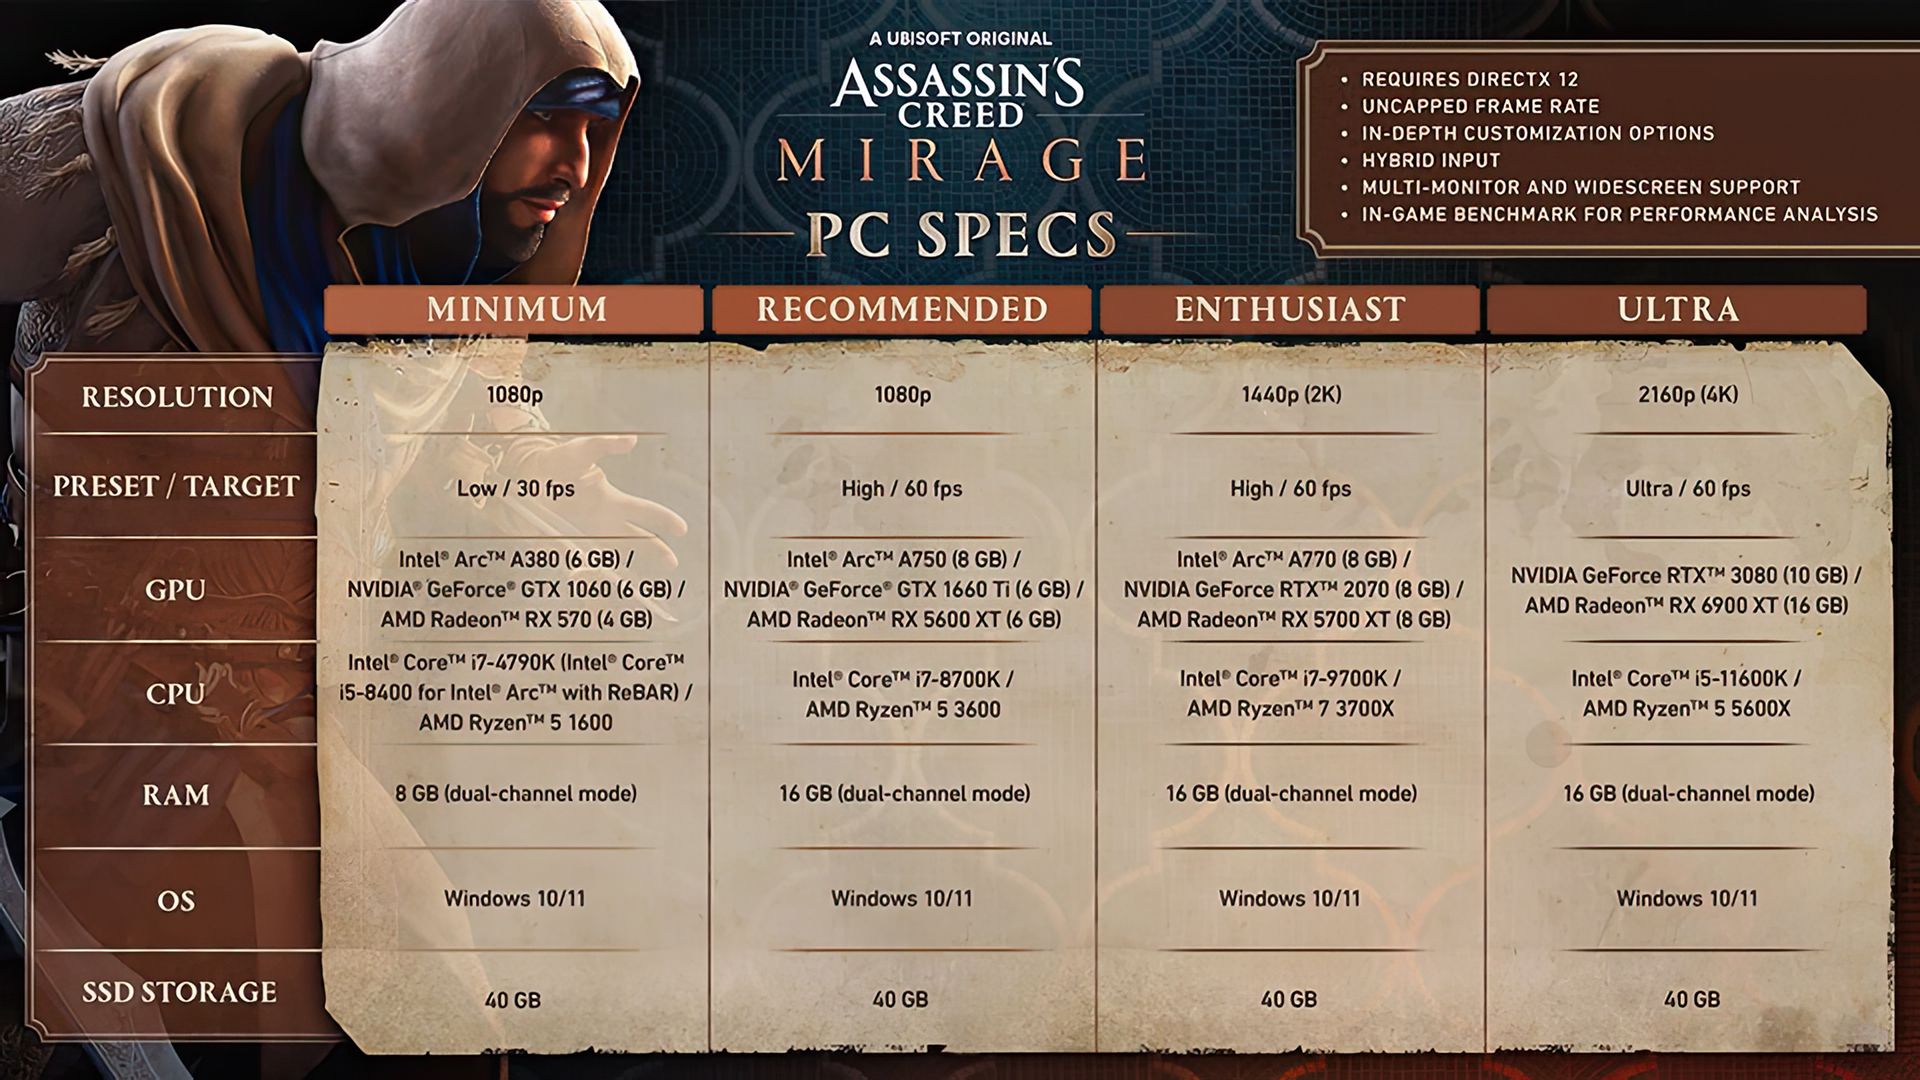 Assassin's Creed Mirage PC System Requirements 1080p upscaled